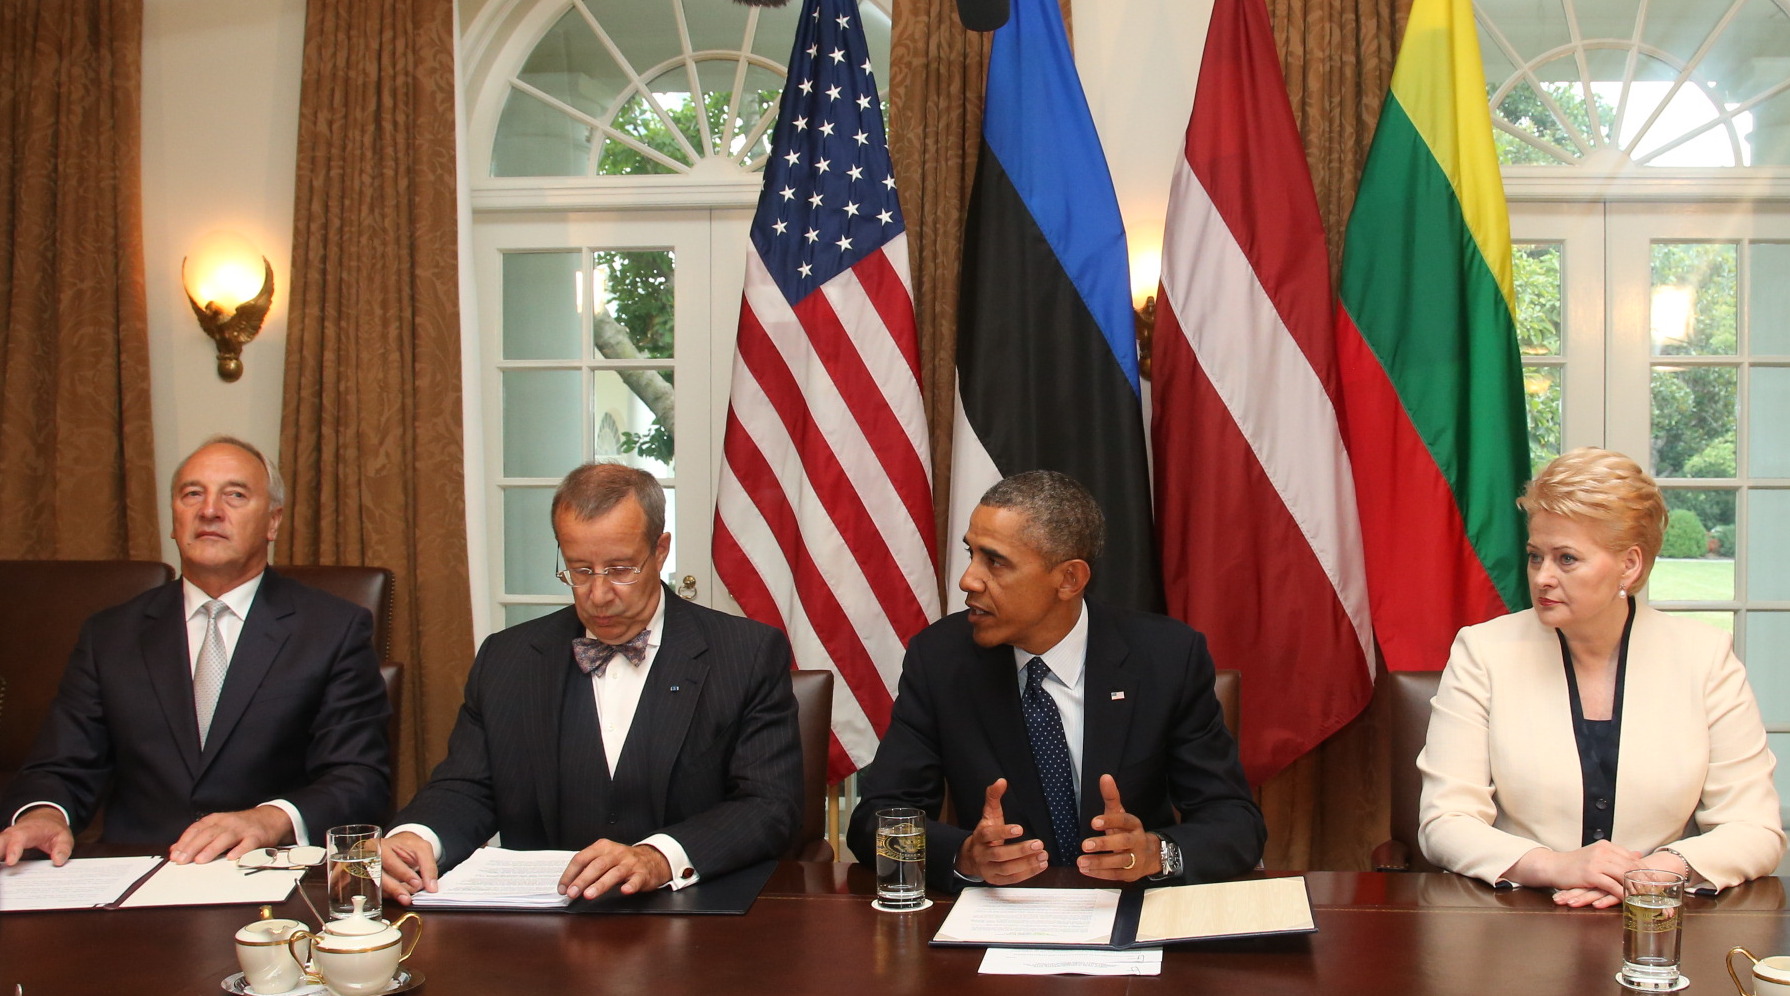 Obama meeting with Baltic leaders at White House